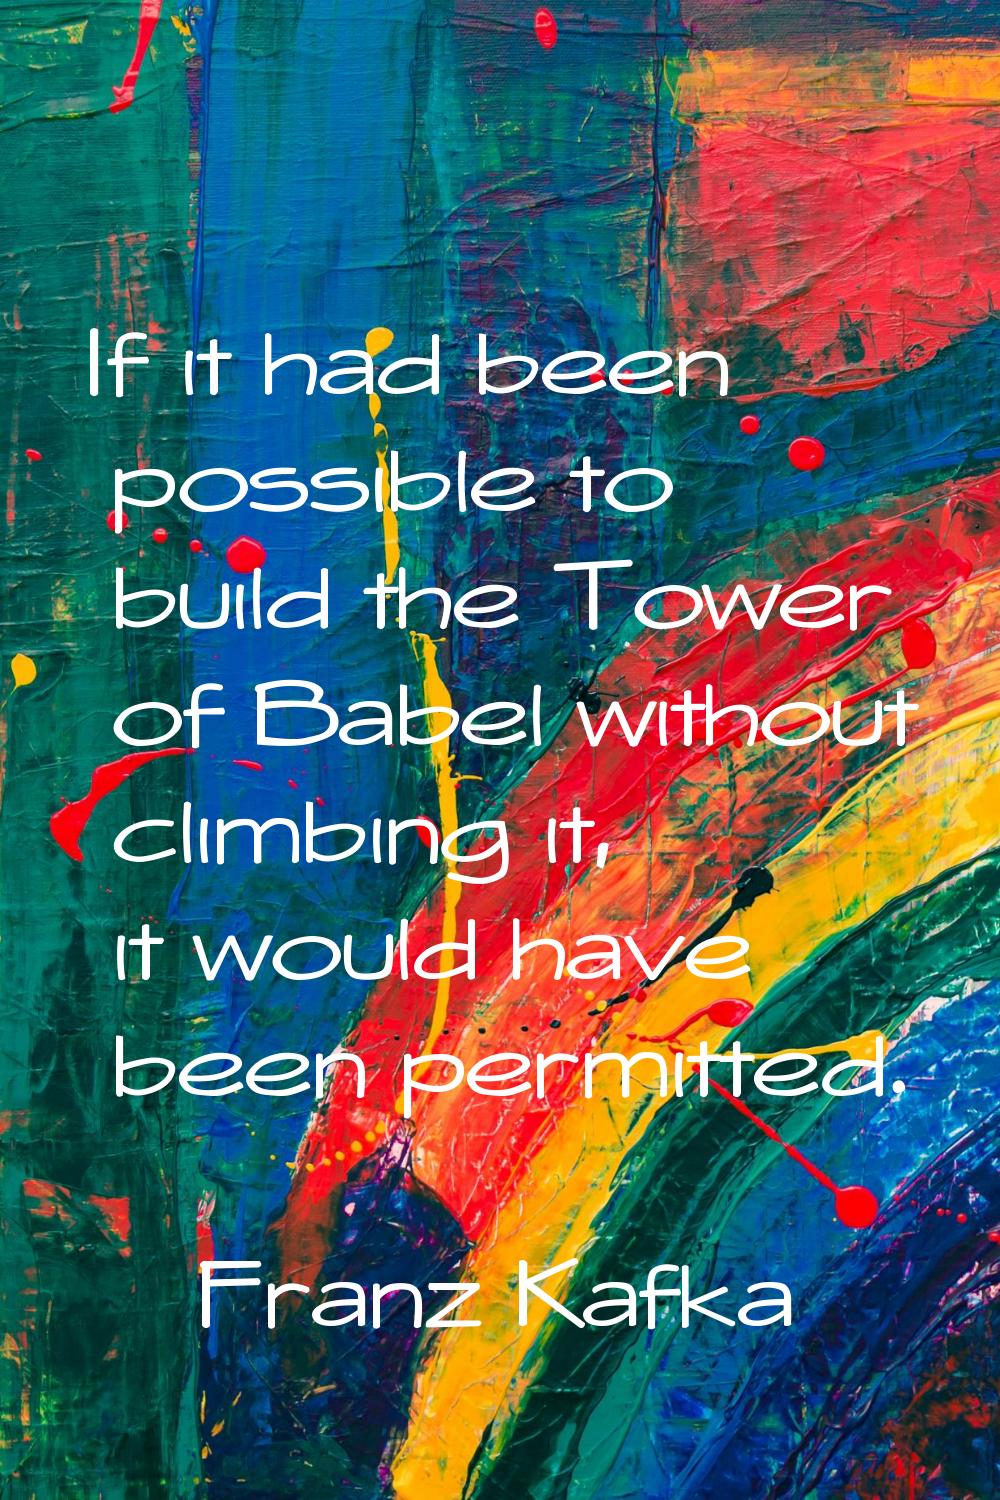 If it had been possible to build the Tower of Babel without climbing it, it would have been permitt